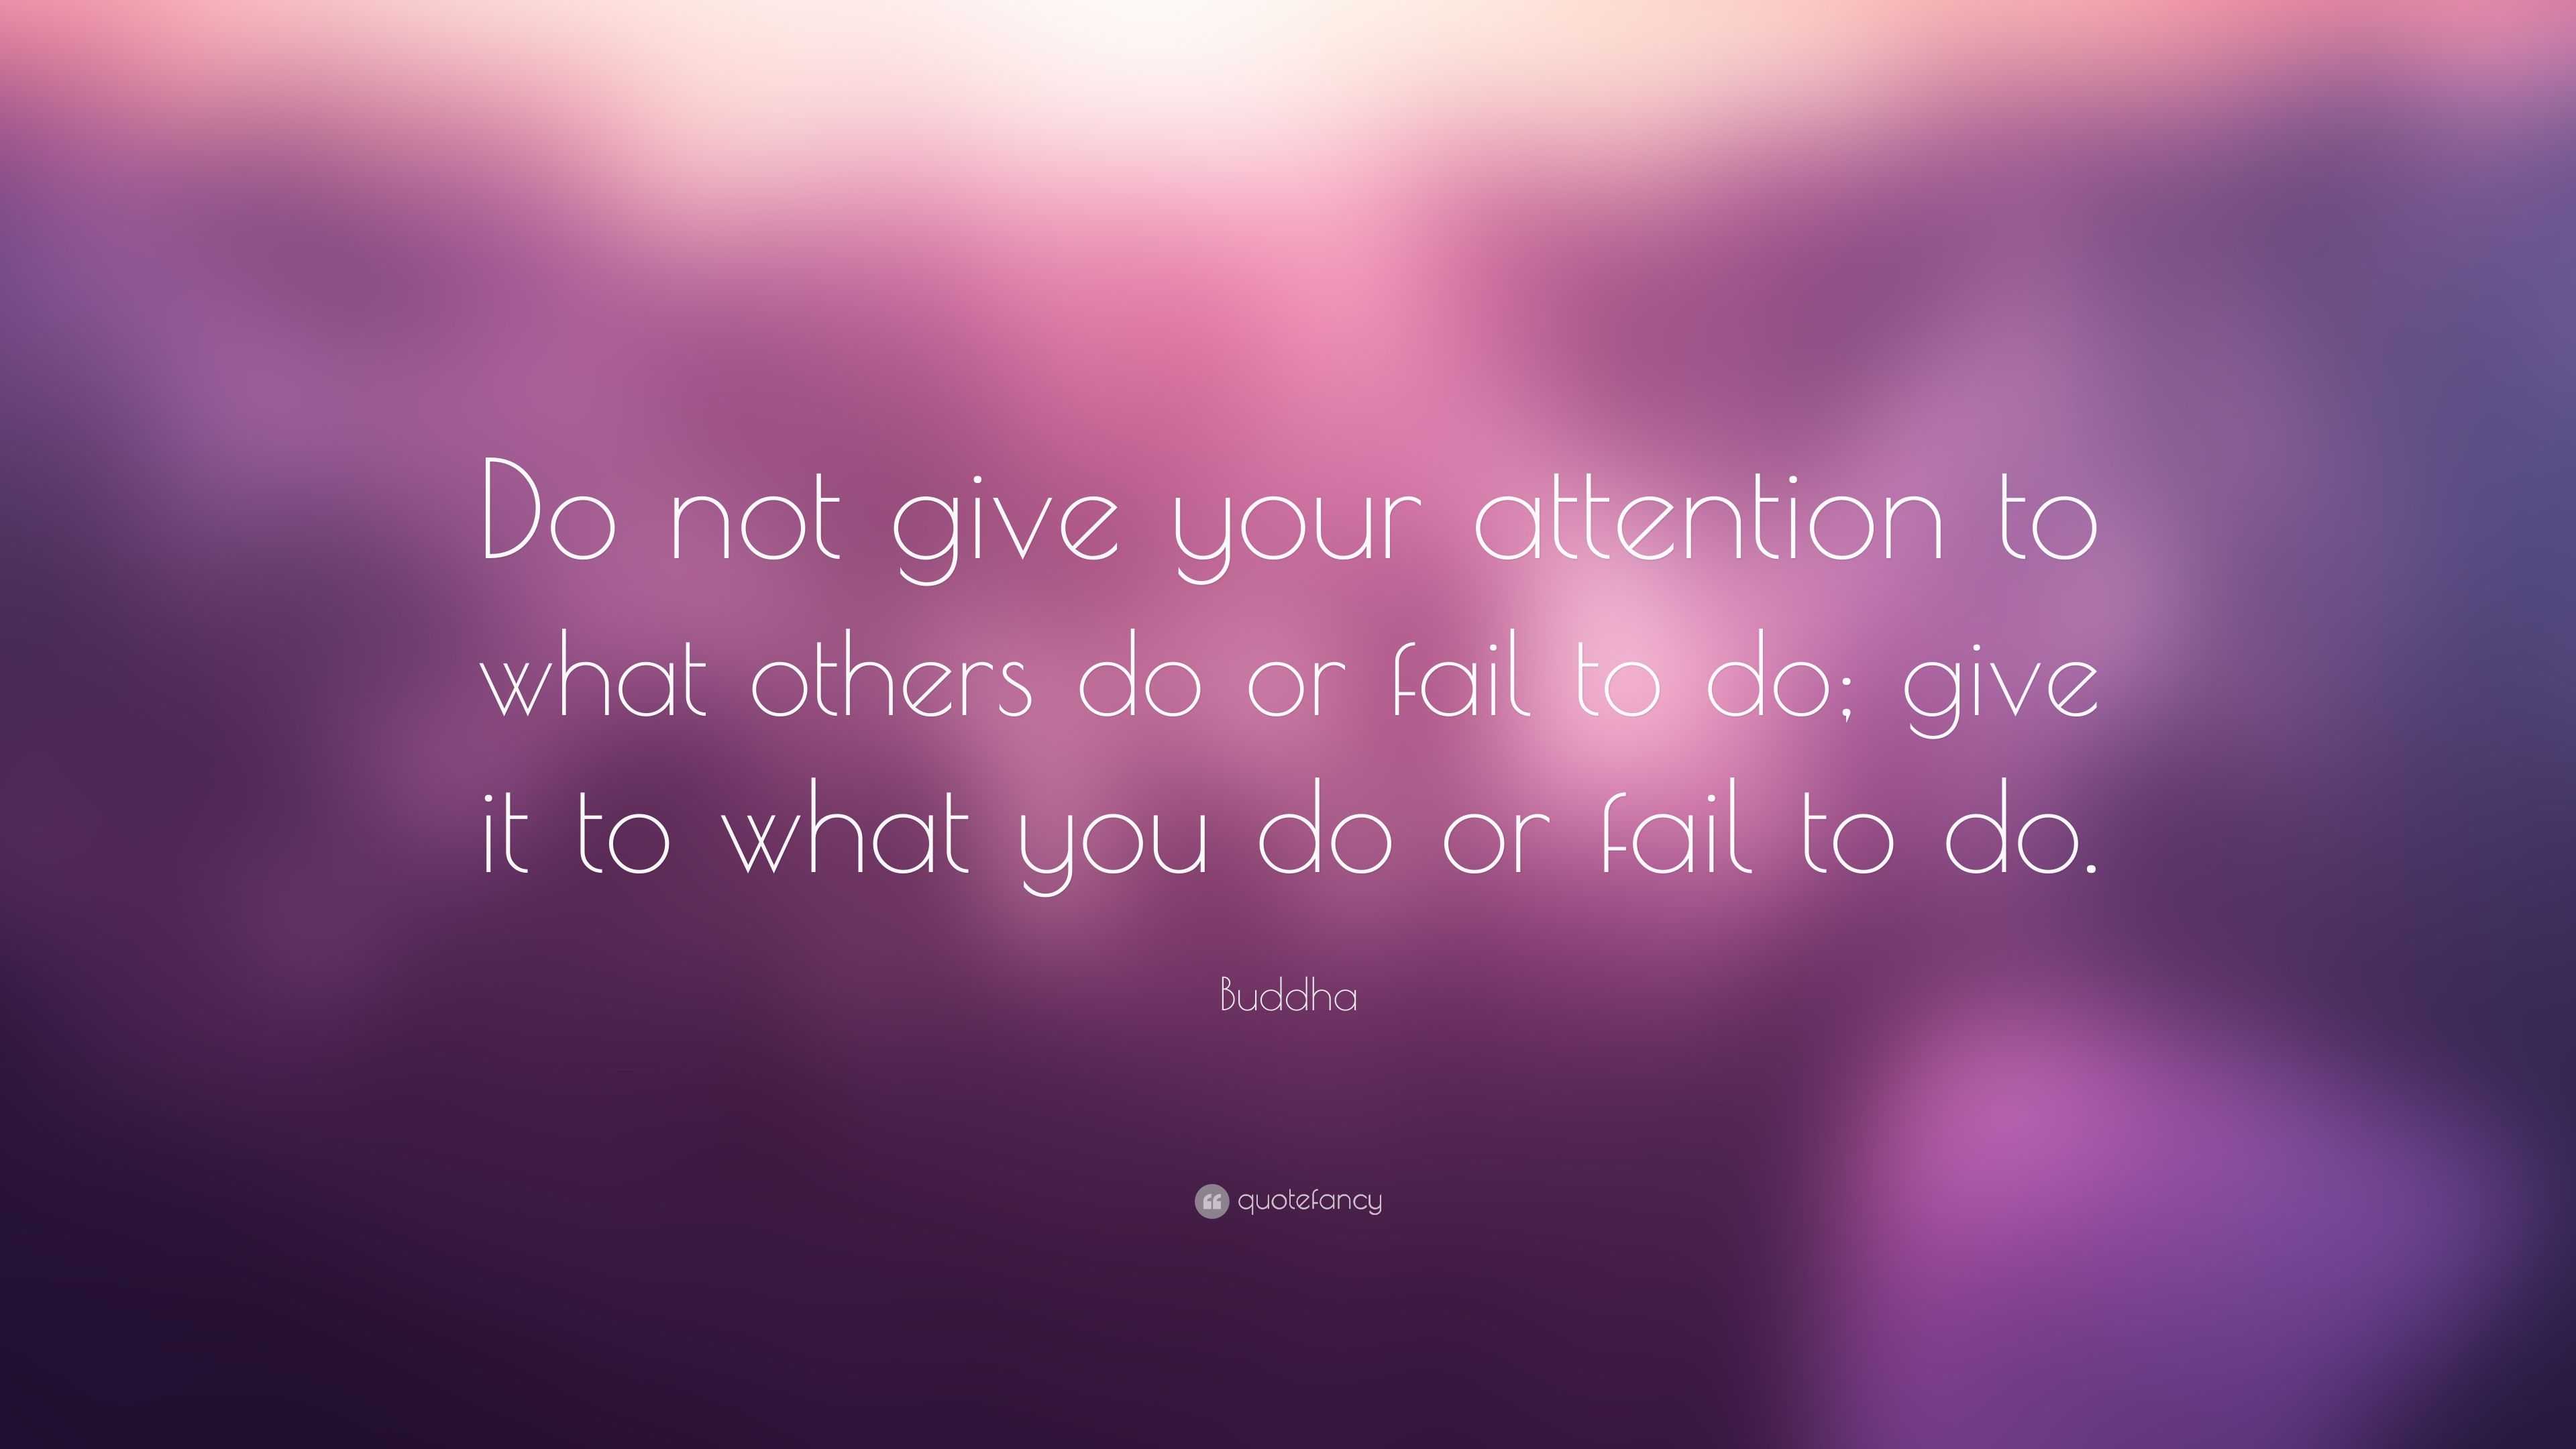 Buddha Quote: “Do not give your attention to what others do or fail to ...